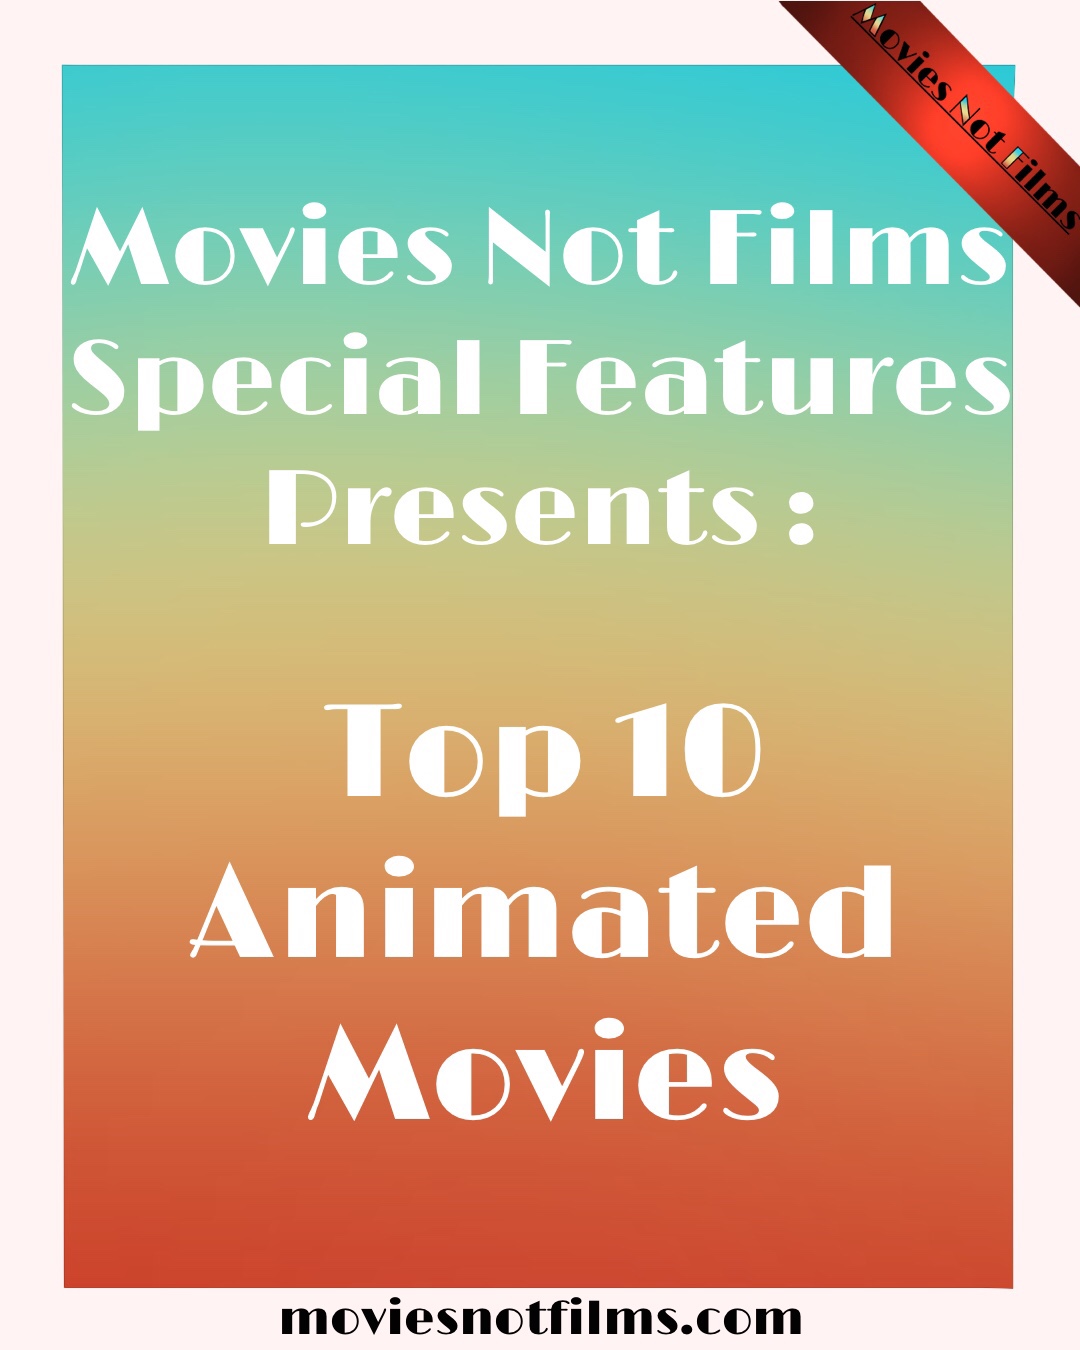 Top 10 Animated Movies